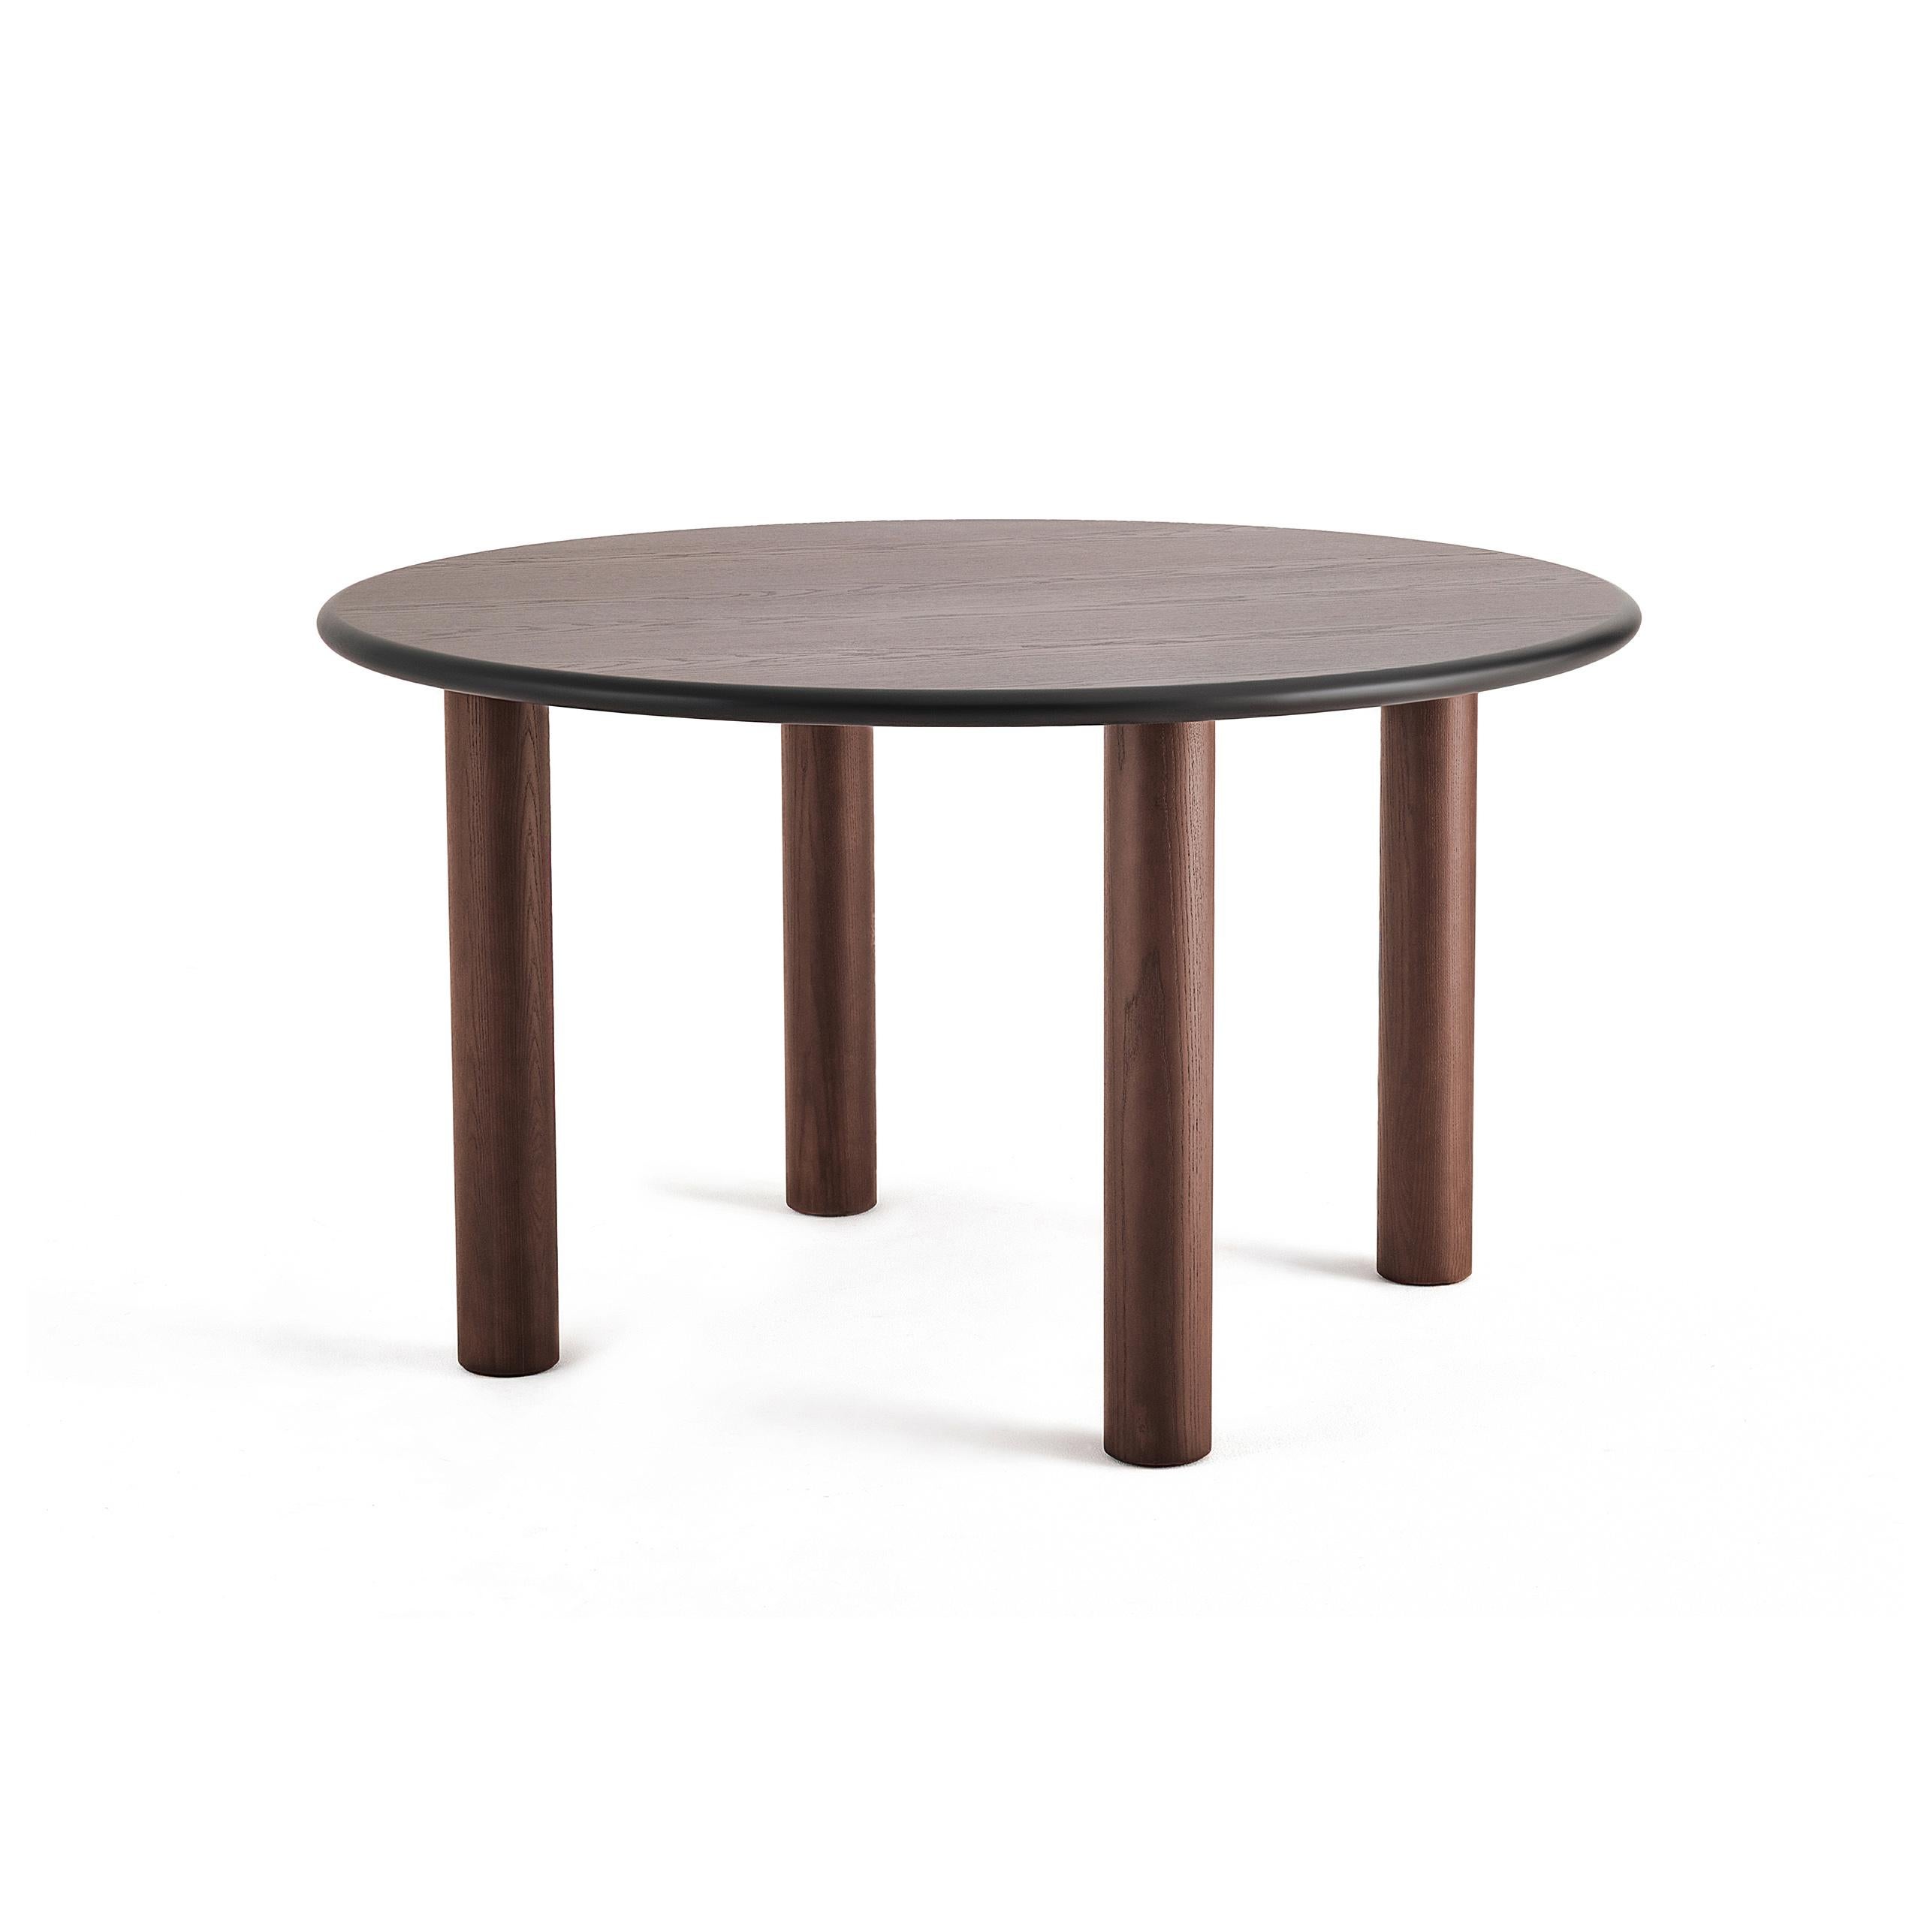 Contemporary Dining Table Paul Made of Wood by Noom